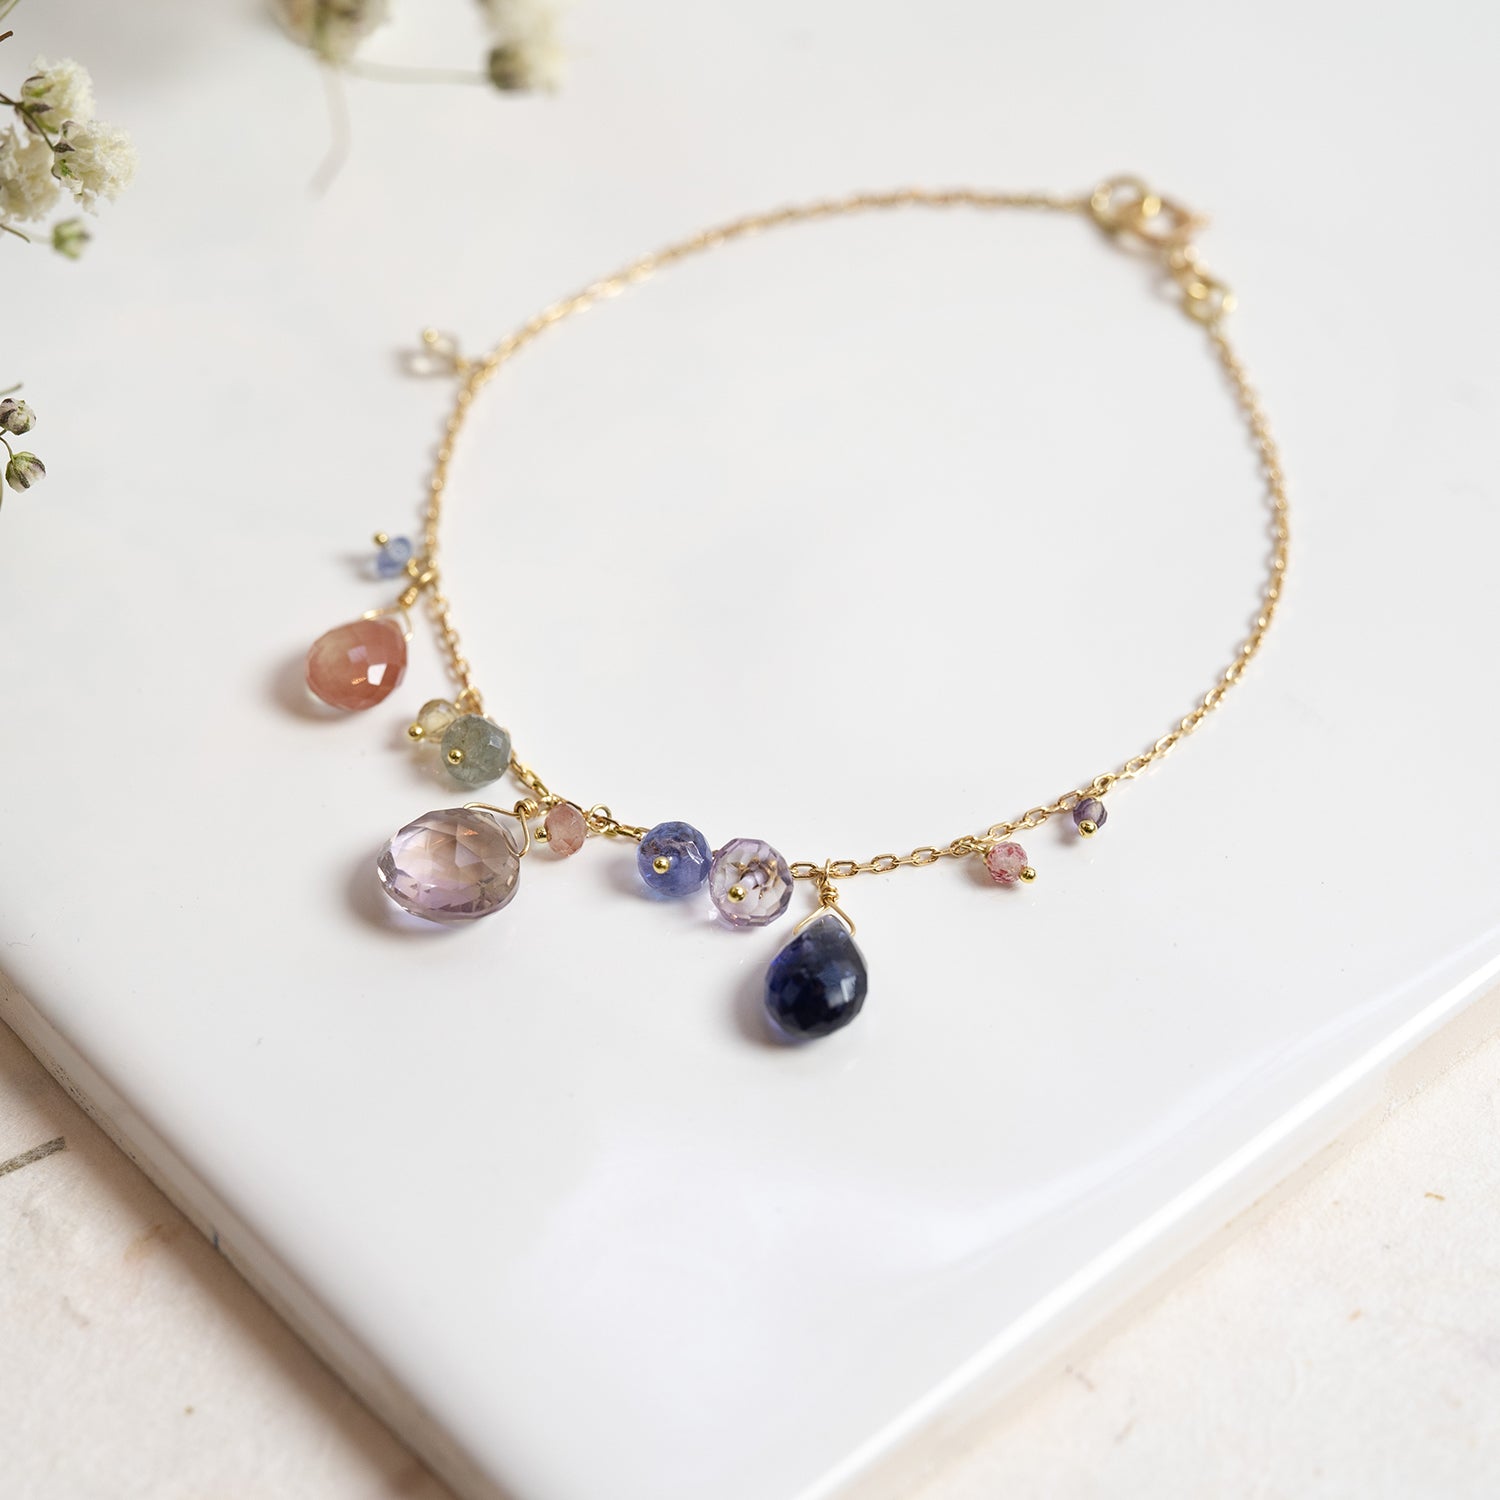 18ct yellow Gold bracelet from our Magic Carpet collection with ametrine, sunstone and iolite drops and a mix of precious beads. 